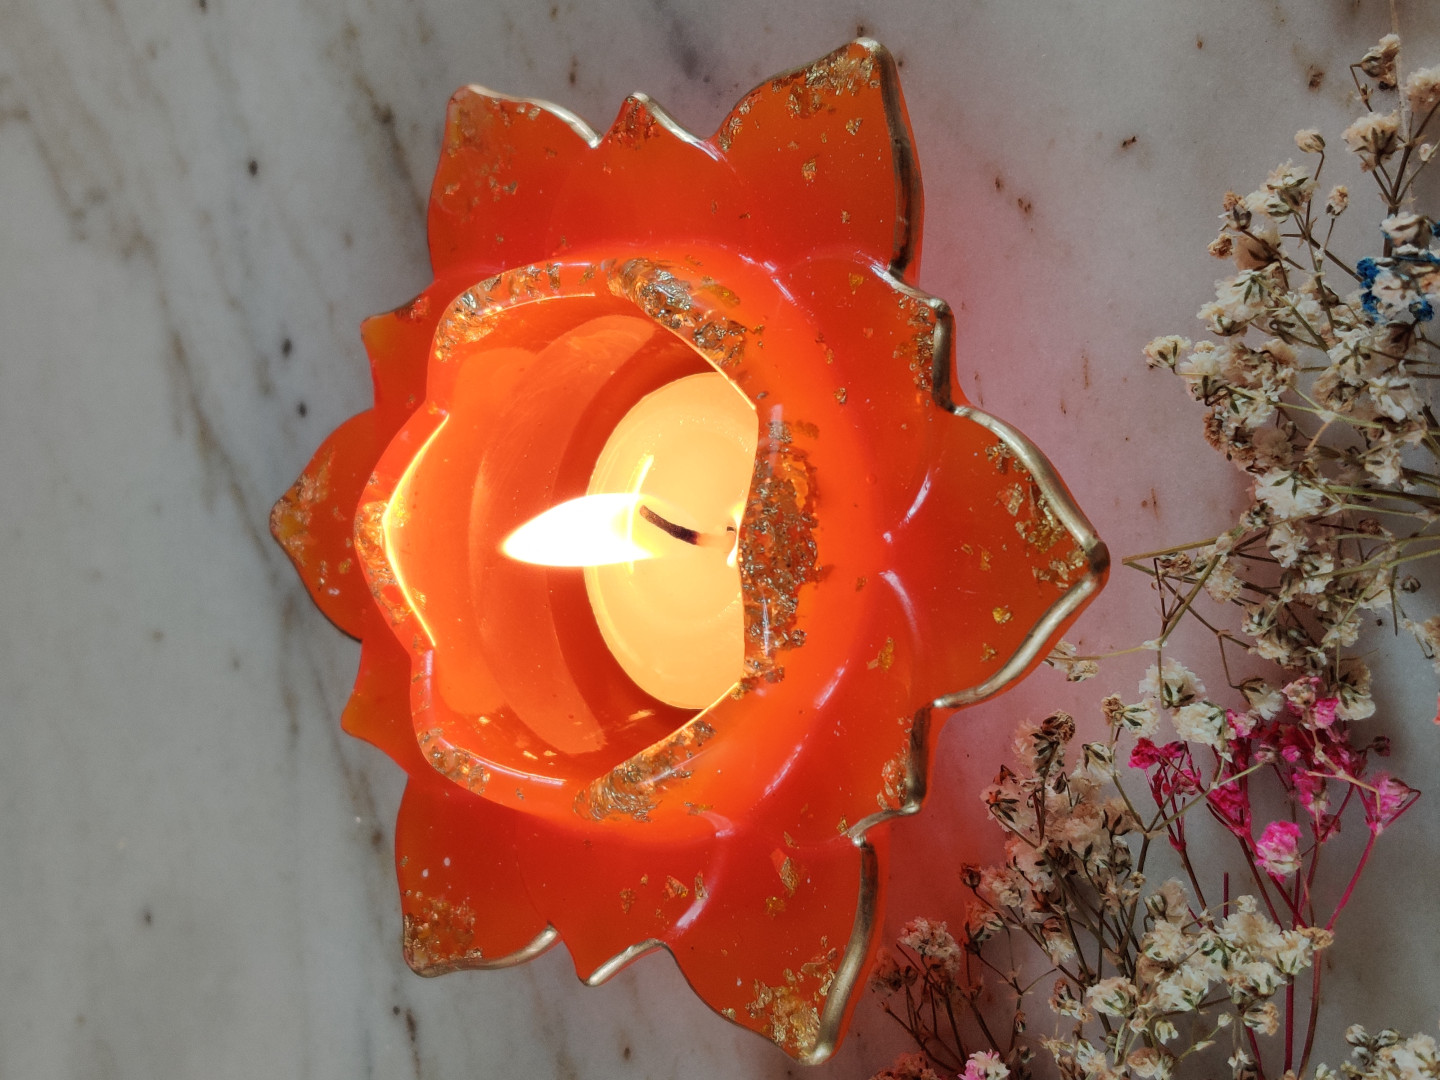 Tealight candle holder